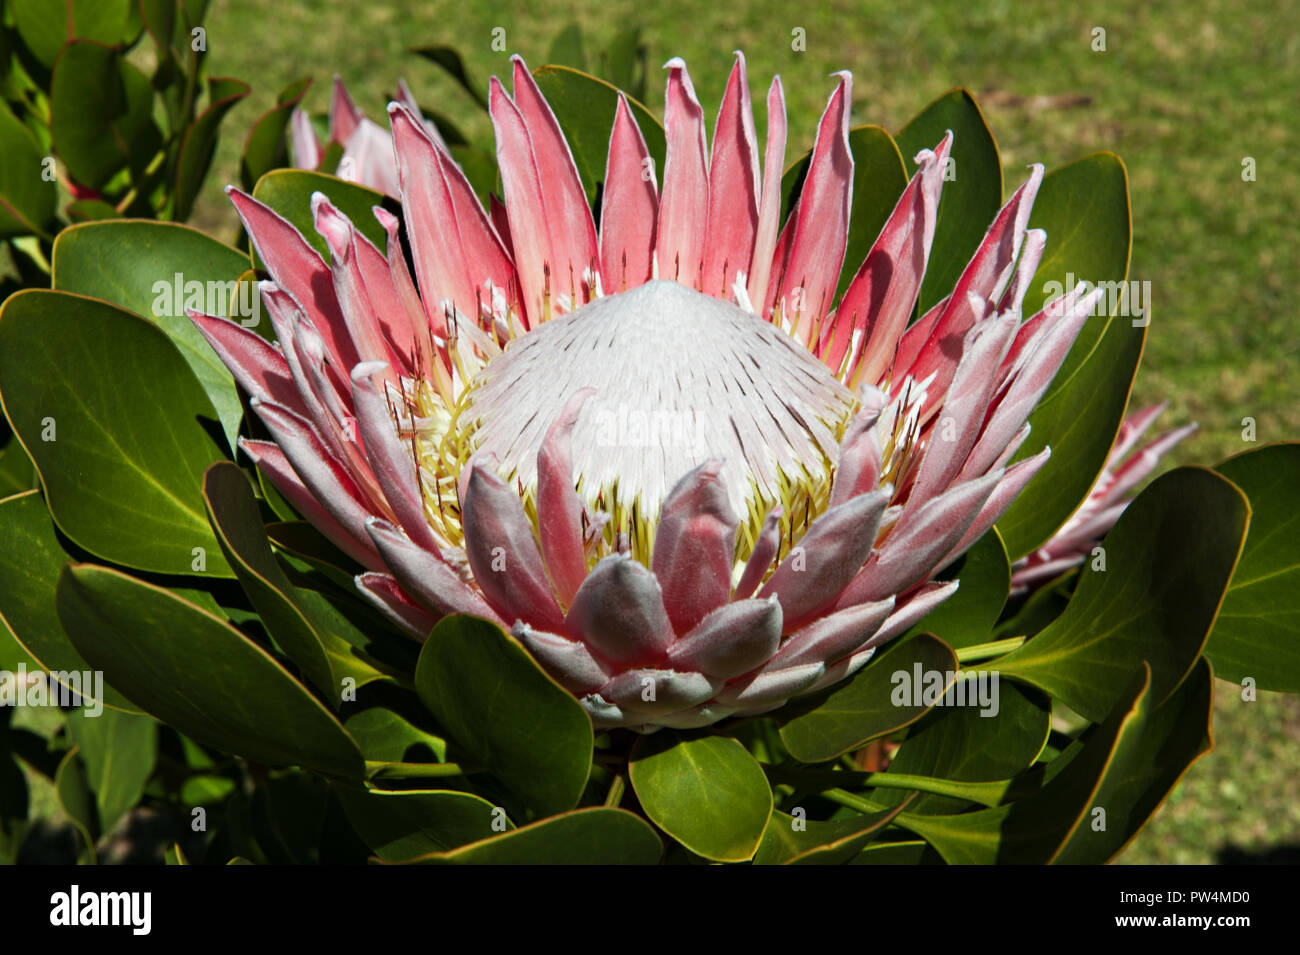 Proteus the south african national flower and emblem at the Kirstenbosch National Botanical Gardens in Cape Town, South Africa Stock Photo